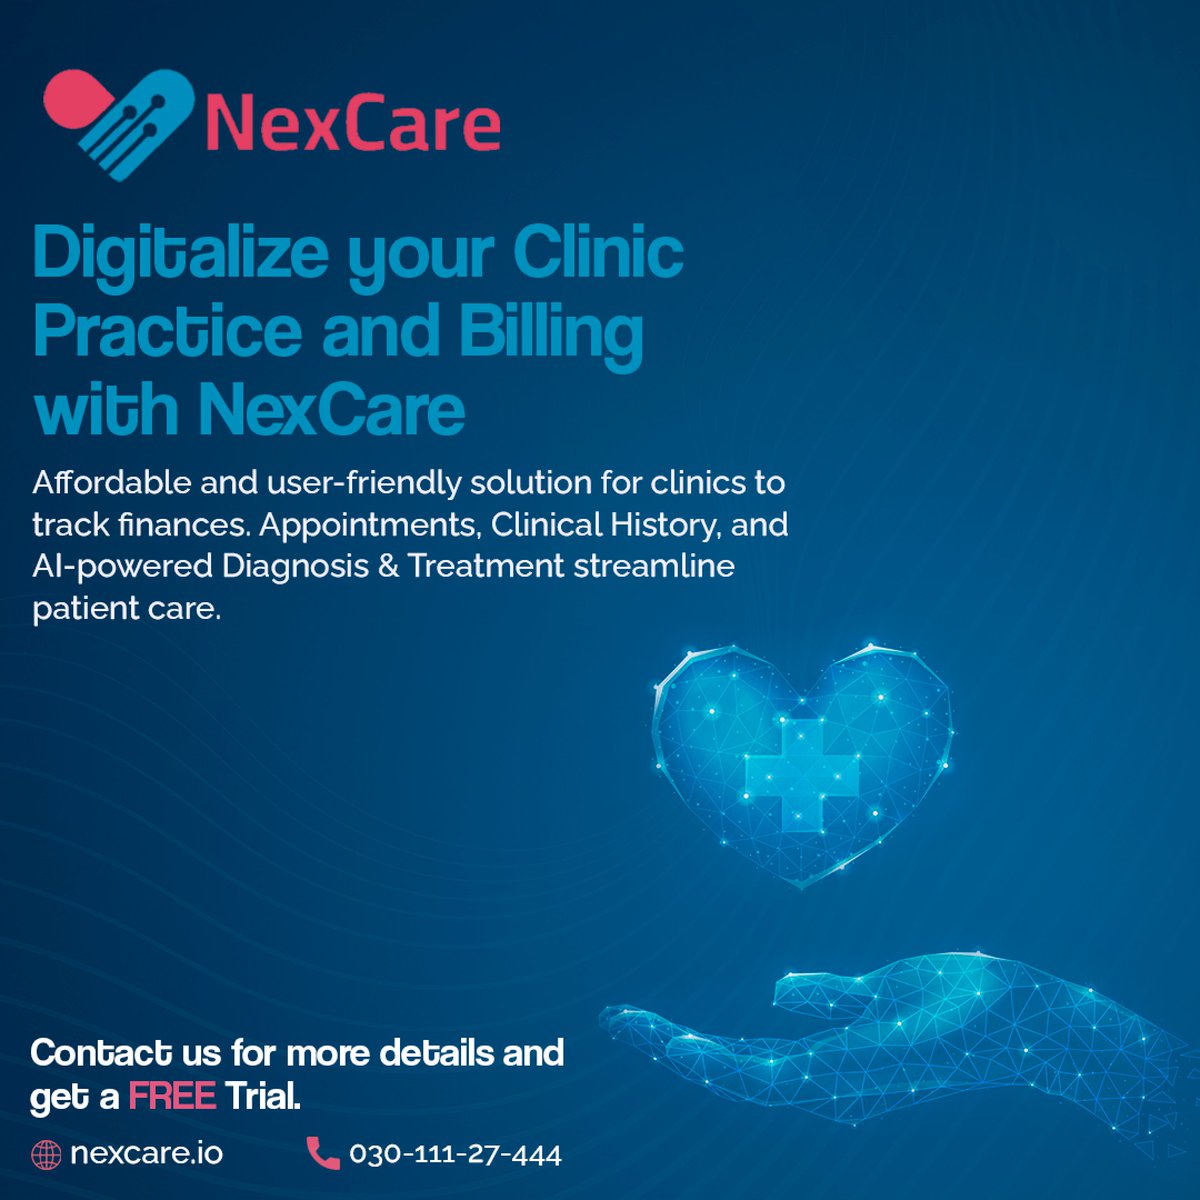 NexCare: Your all-in-one solution for clinic efficiency and patient satisfaction. ✨💪🏥

#clinicmanagement #HealthcareTechnology
#PatientCareSimplified #Nexcare